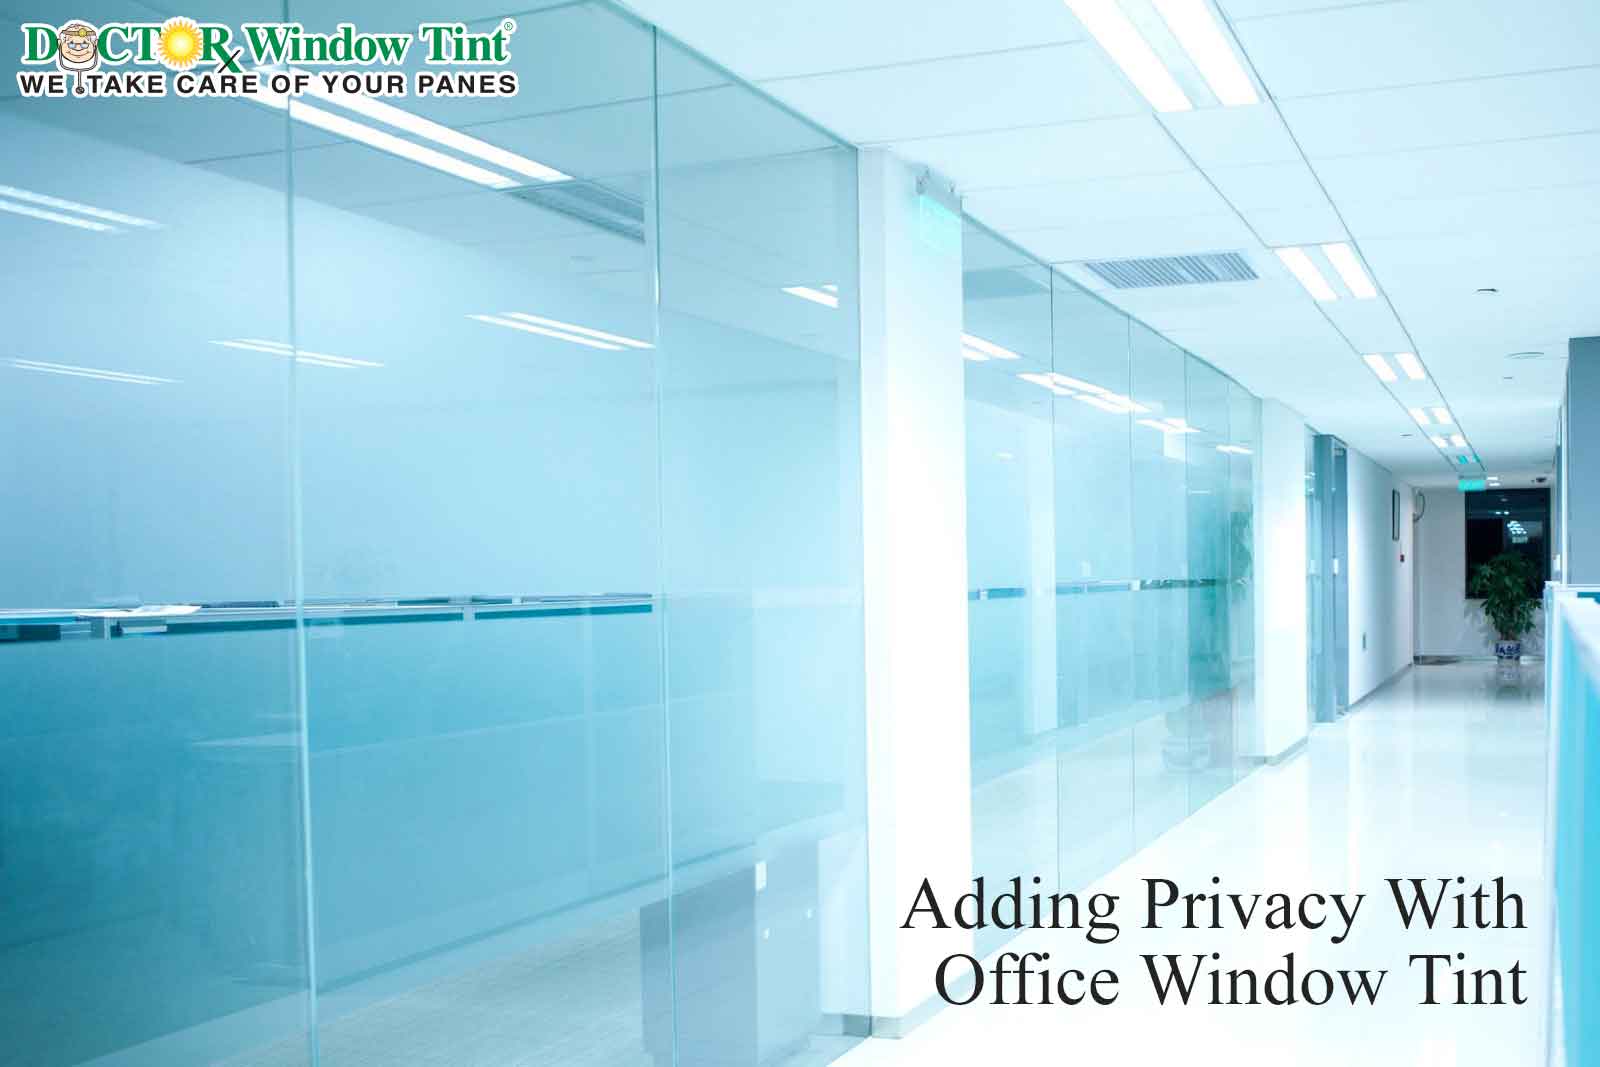 privacy windows for doctors offices